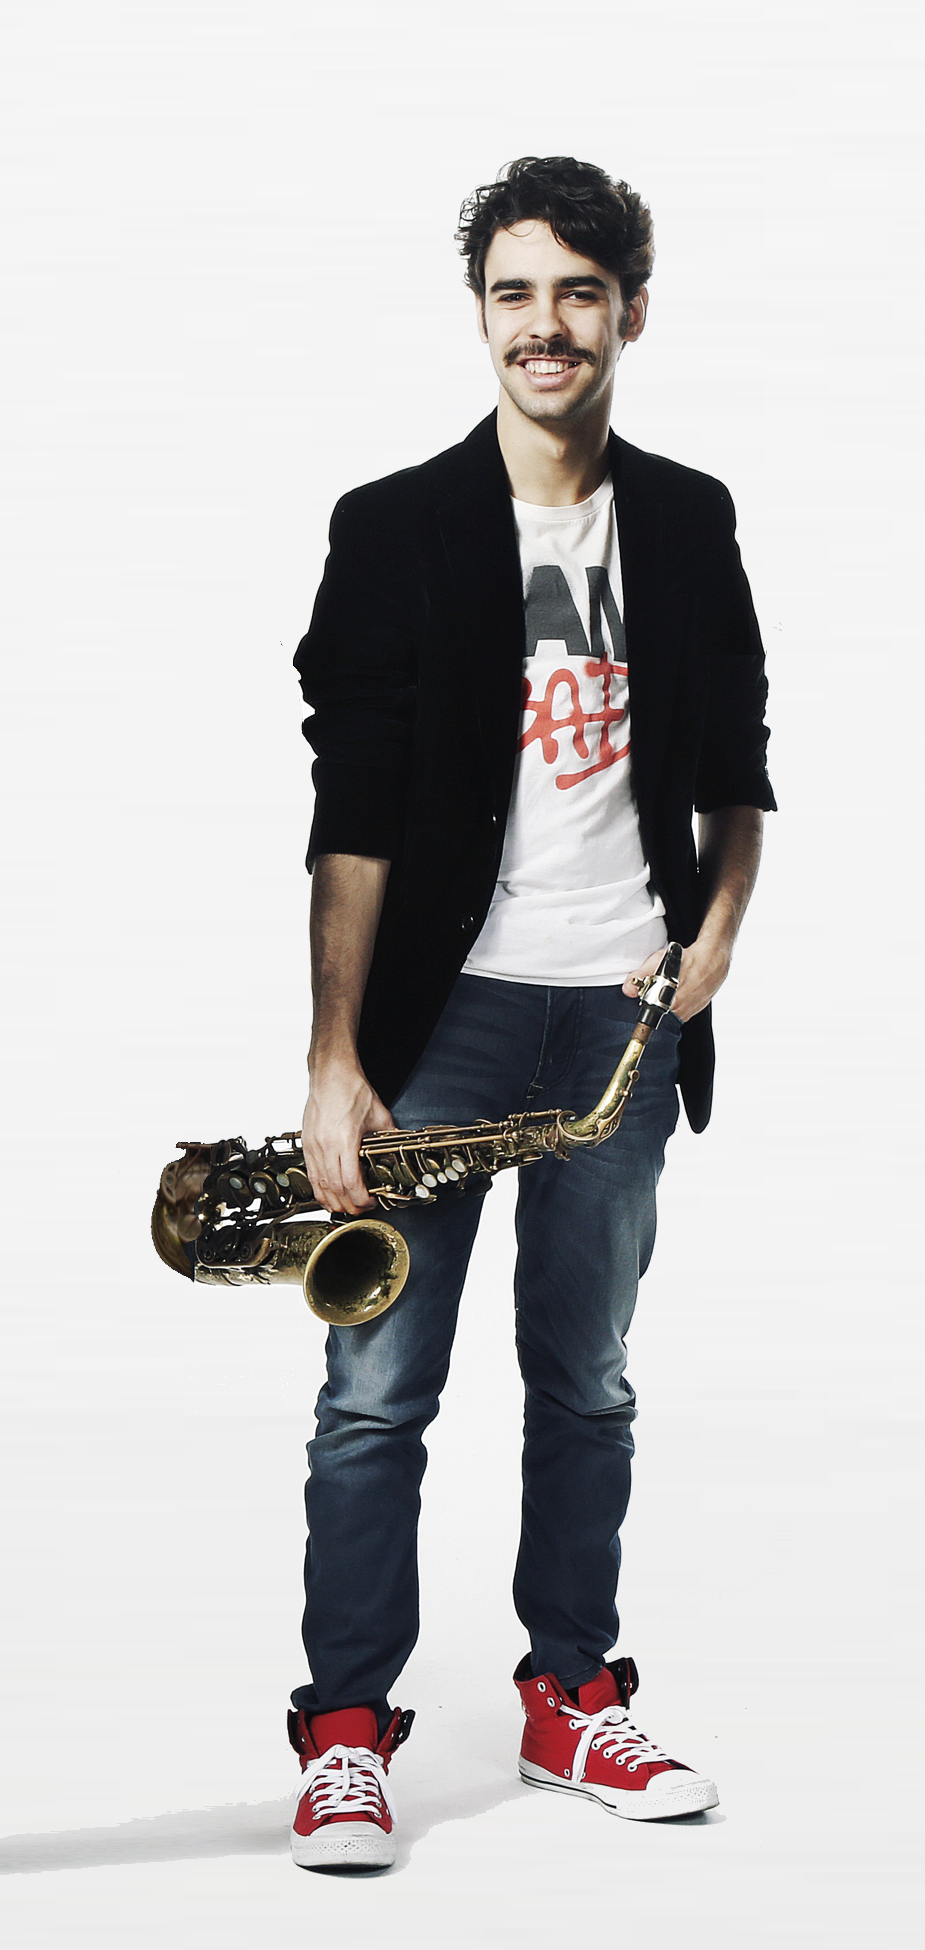 Saxophonist Eddie Barbash of “Stay Human,” the band for “Late Night with Stephen Colbert,” will be the guest soloist for a concert at Saturday, May 7, at 7:30 p.m. in The  University of Scranton’s Houlihan McLean Center.